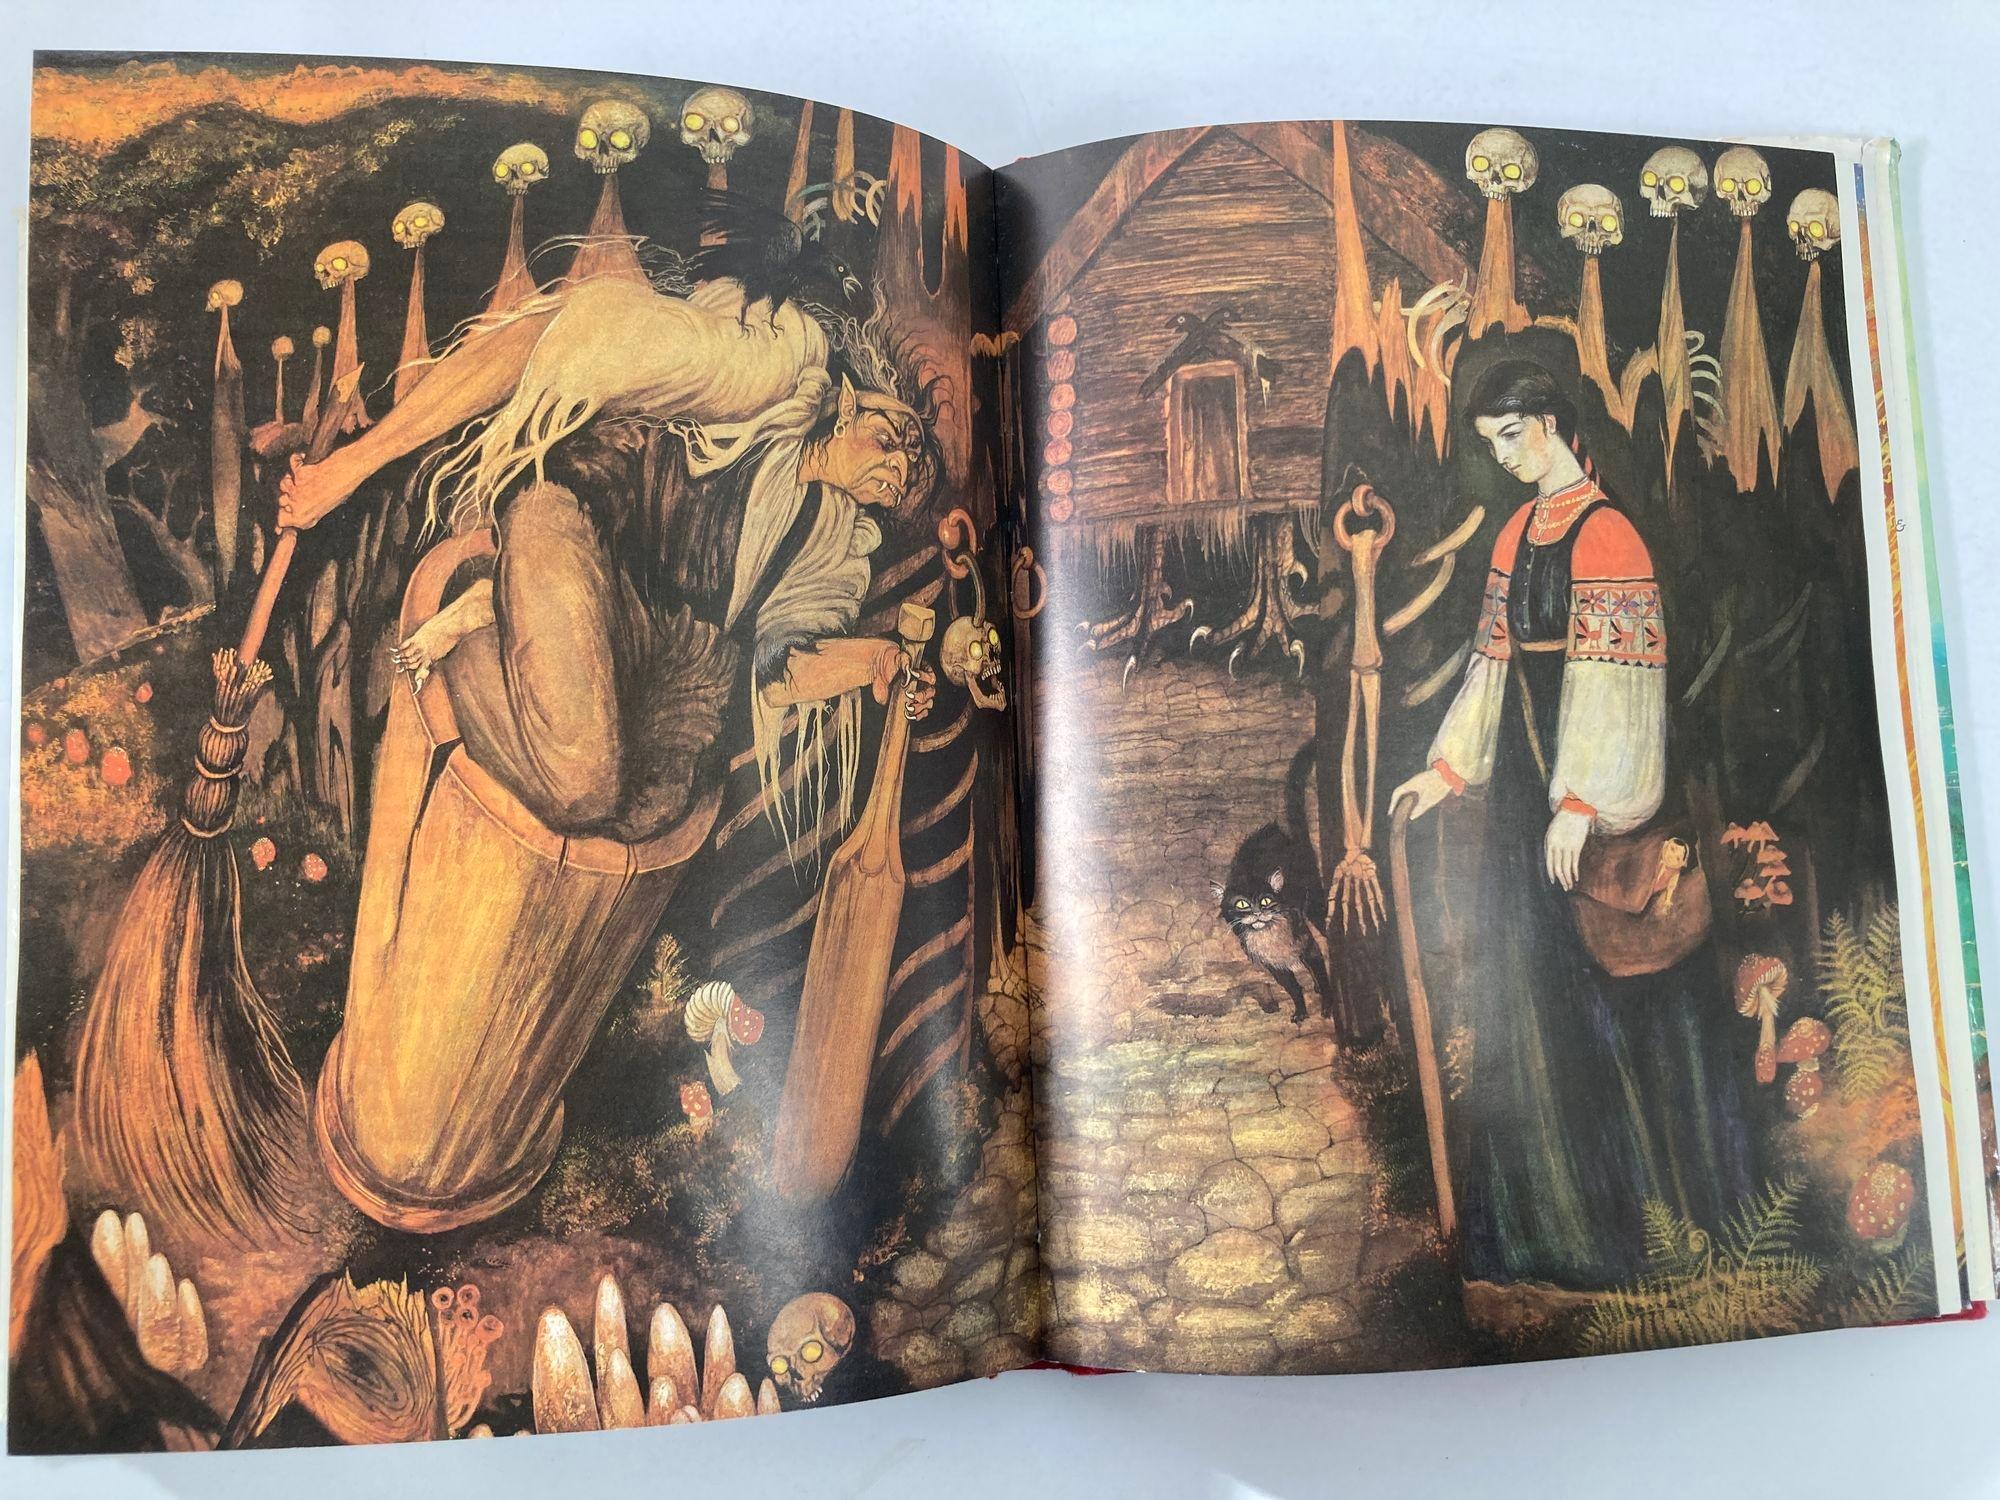 Heroes Monsters & Other Worlds from Russian Mythology Hardcover Book 1985 1st Ed en vente 5